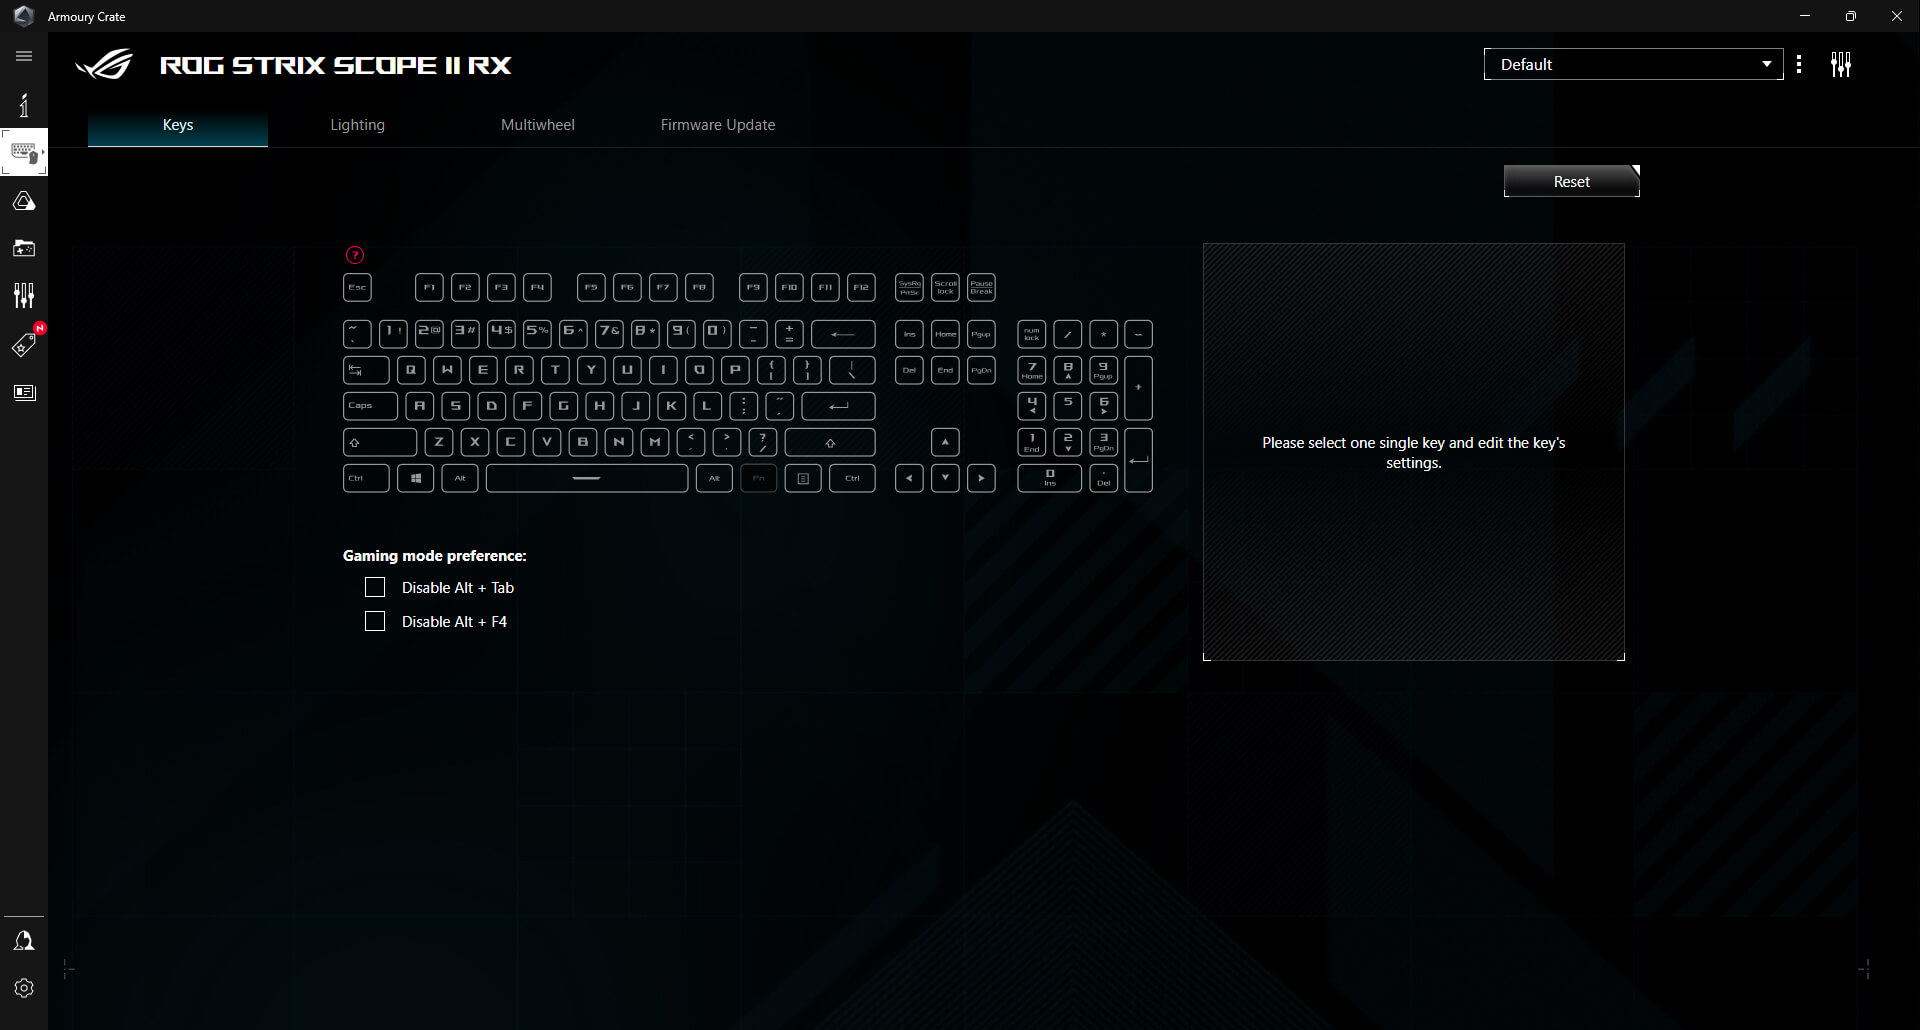 Graphic user interface of Armoury Crate for ROG Strix Scope II RX